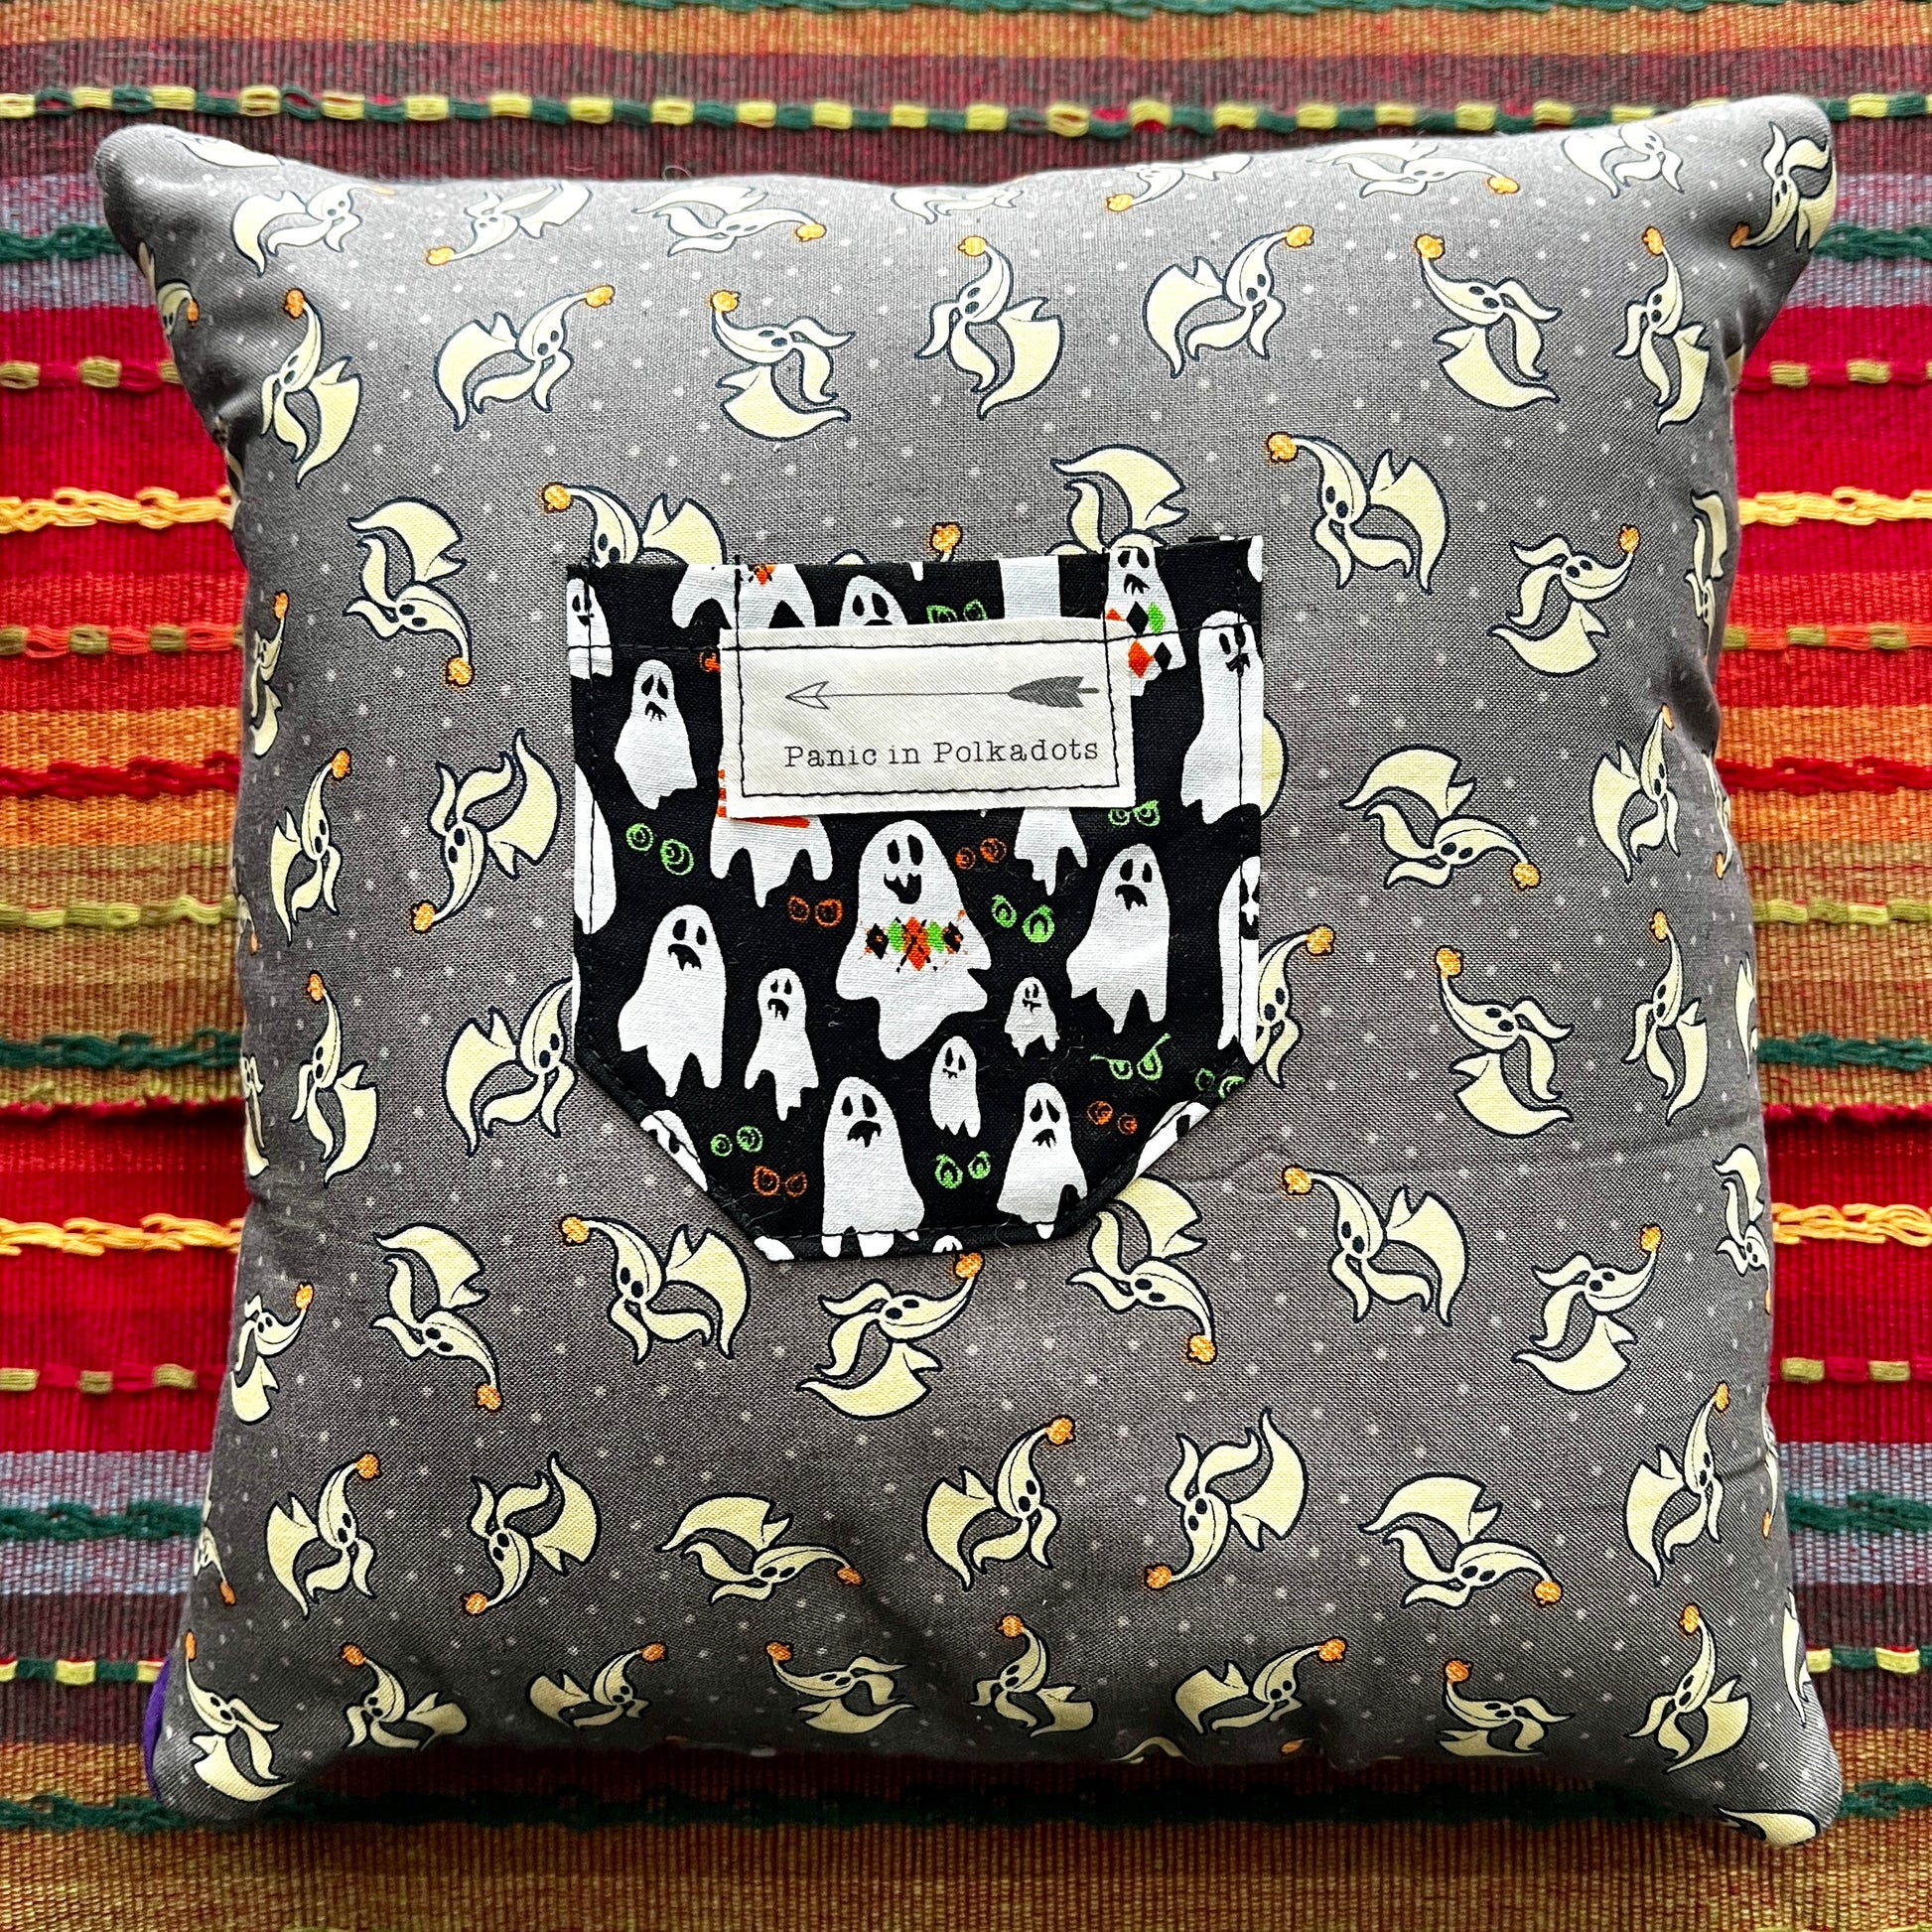 back view of nightmare before christmas cathedral square pillow, with zero and ghosties pocket